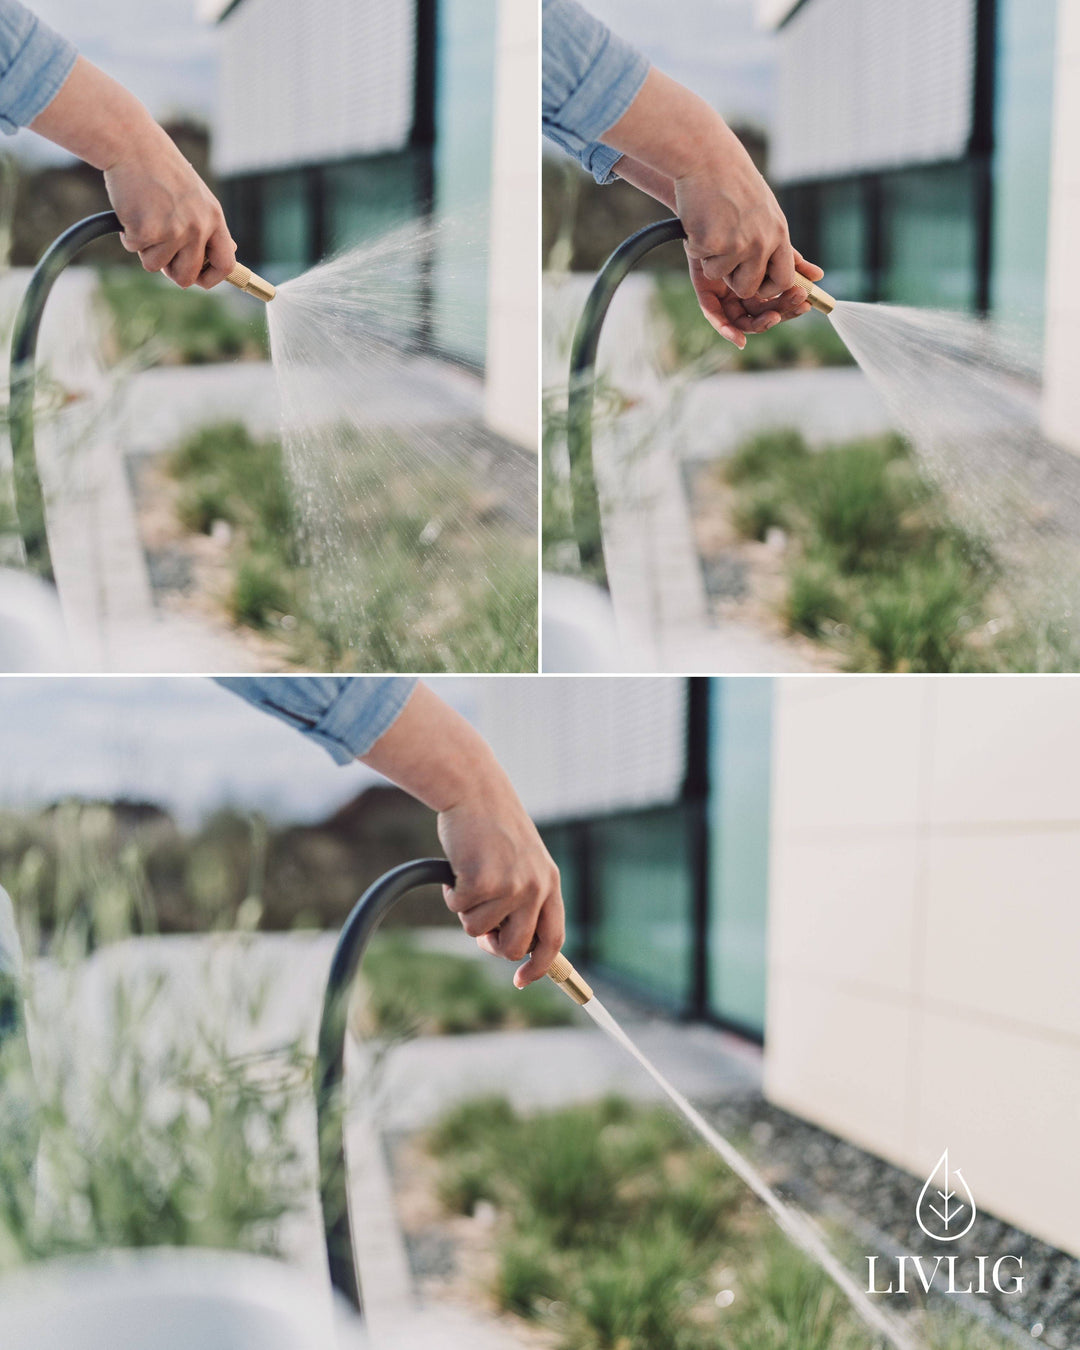 a series of photos showing a person watering plants